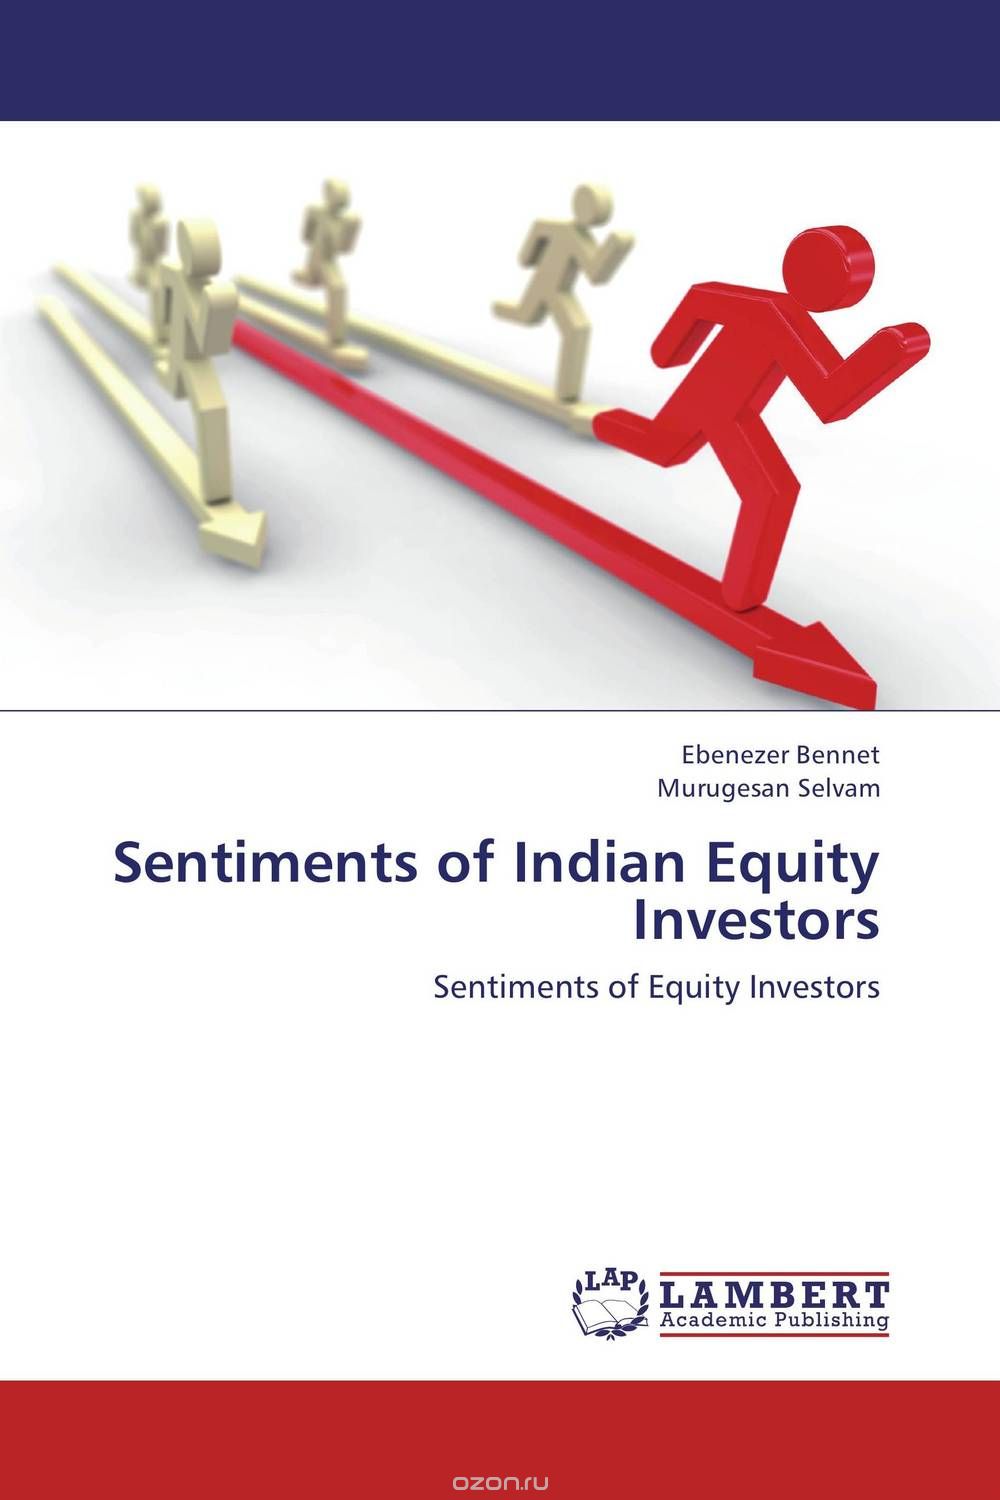 Sentiments of Indian Equity Investors